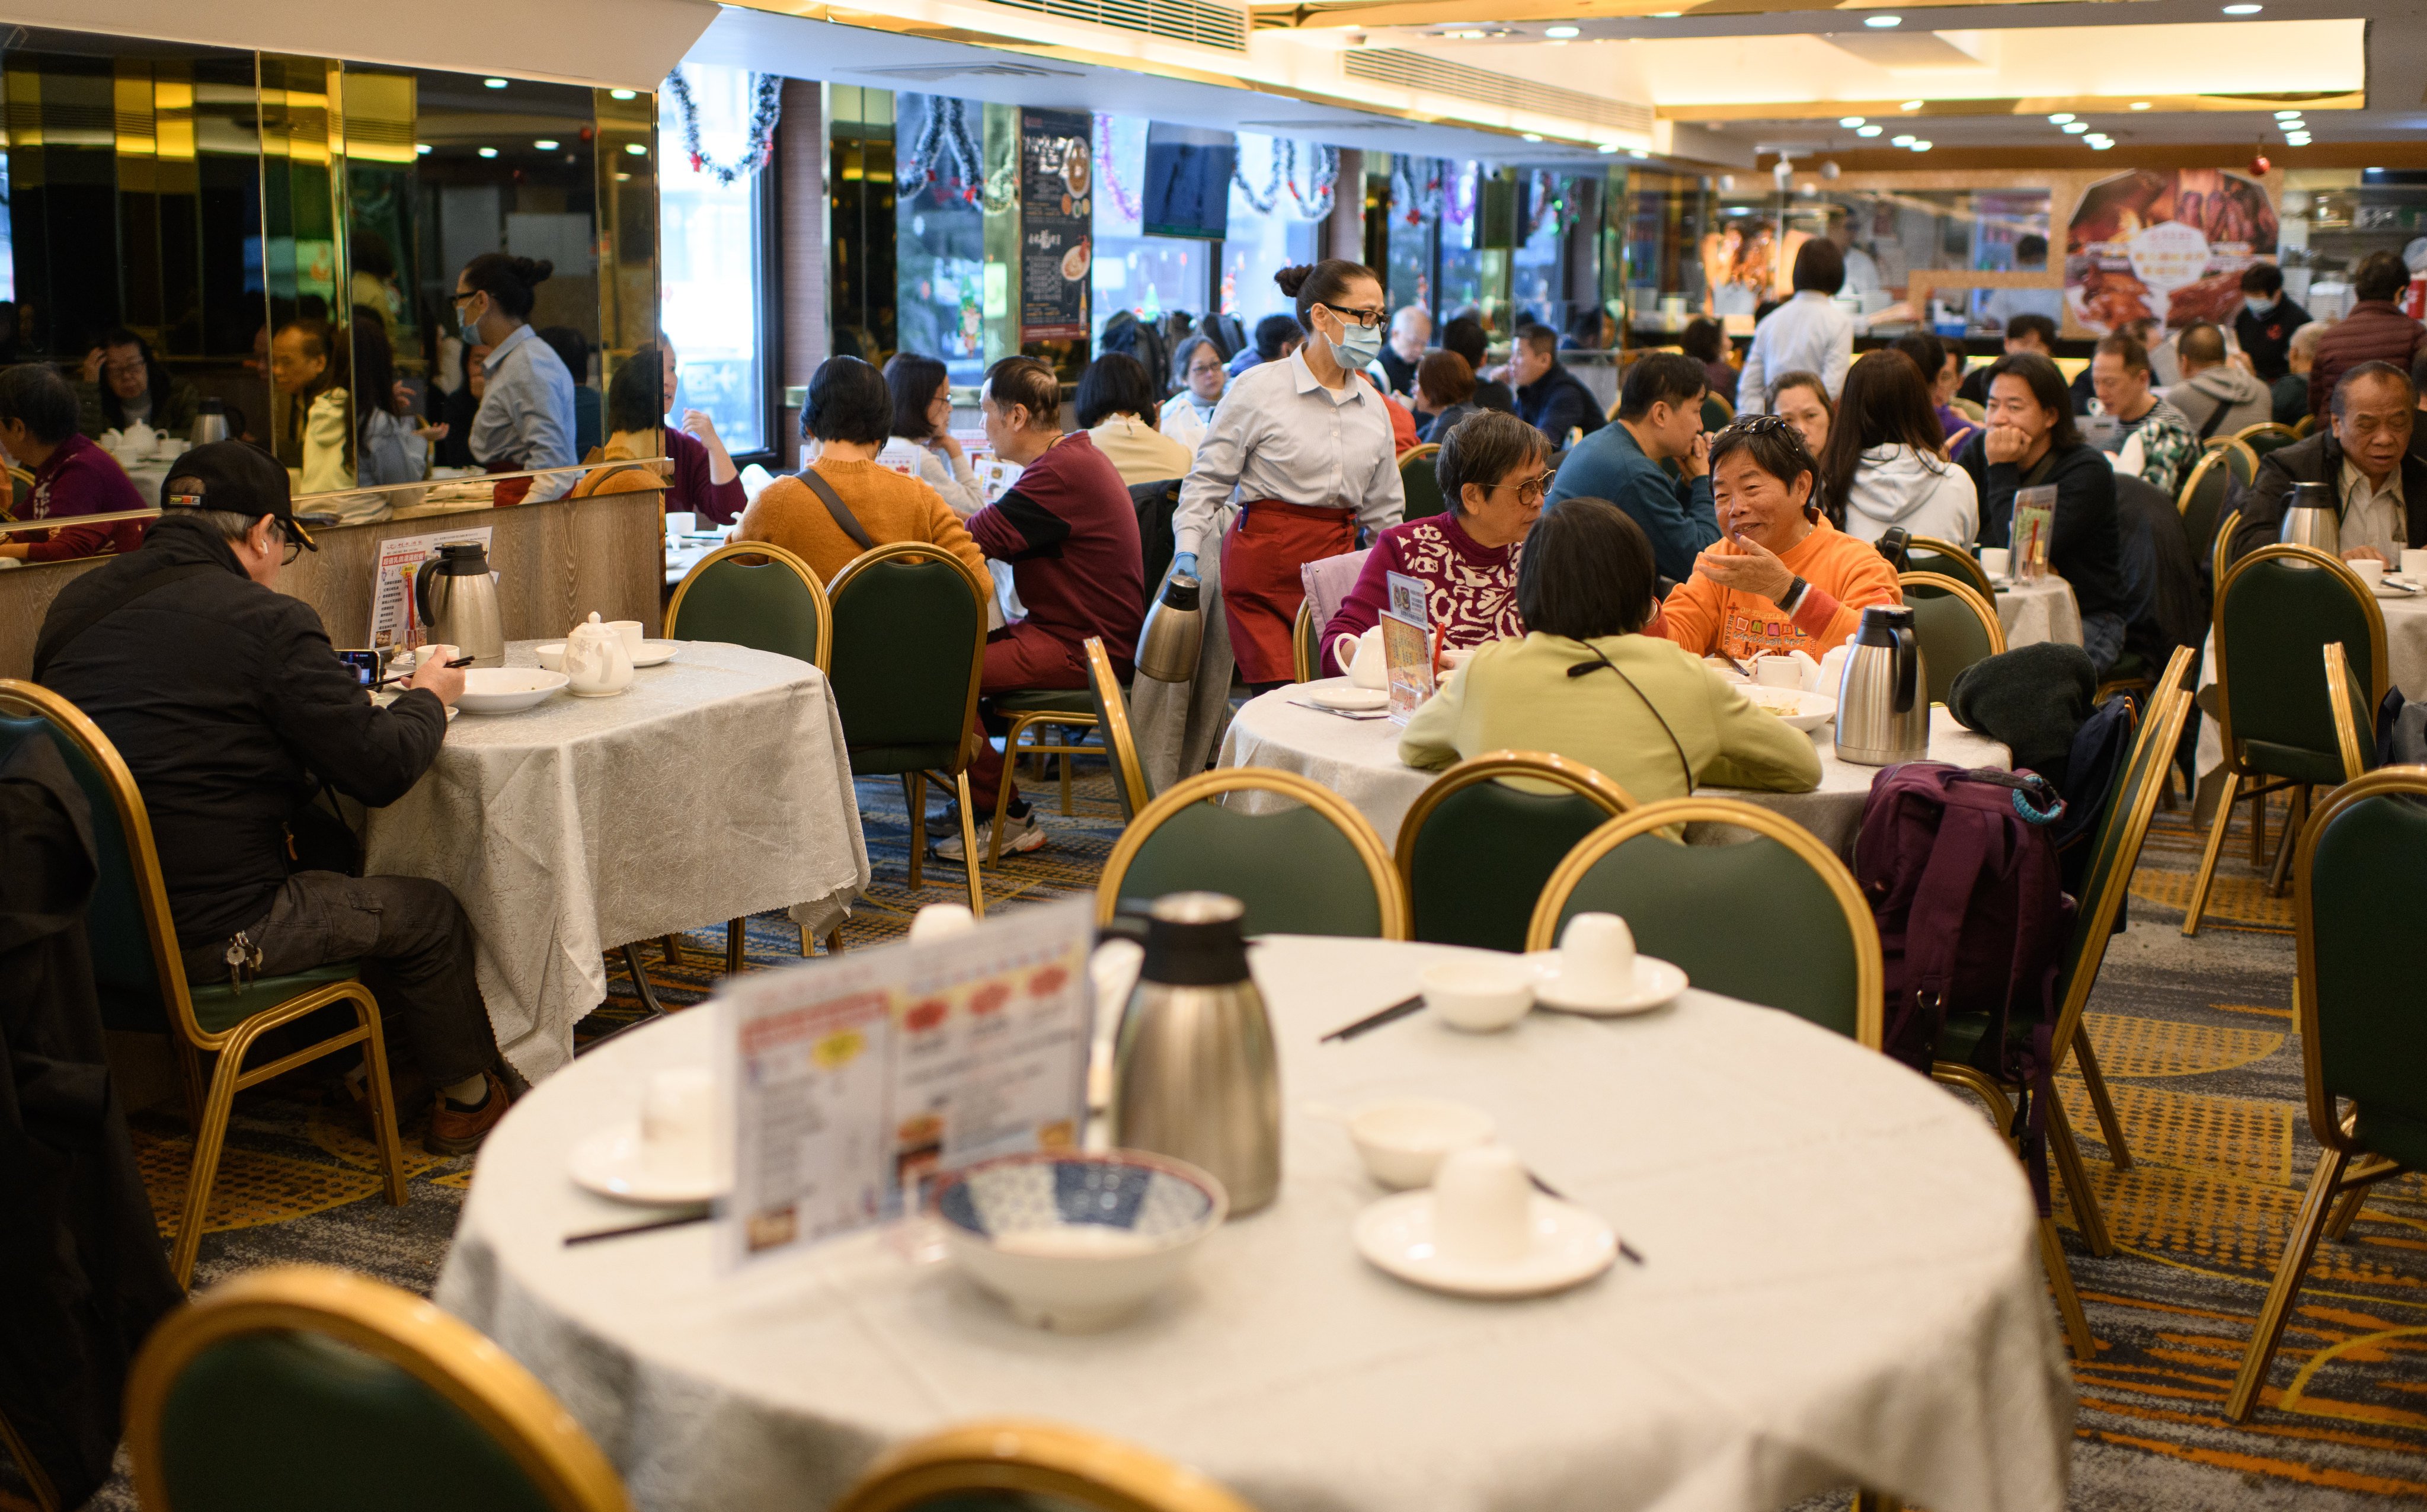 Hongkongers eat out on Christmas Day, even as others head across the border and overseas for the holiday. Photo: Warton Li